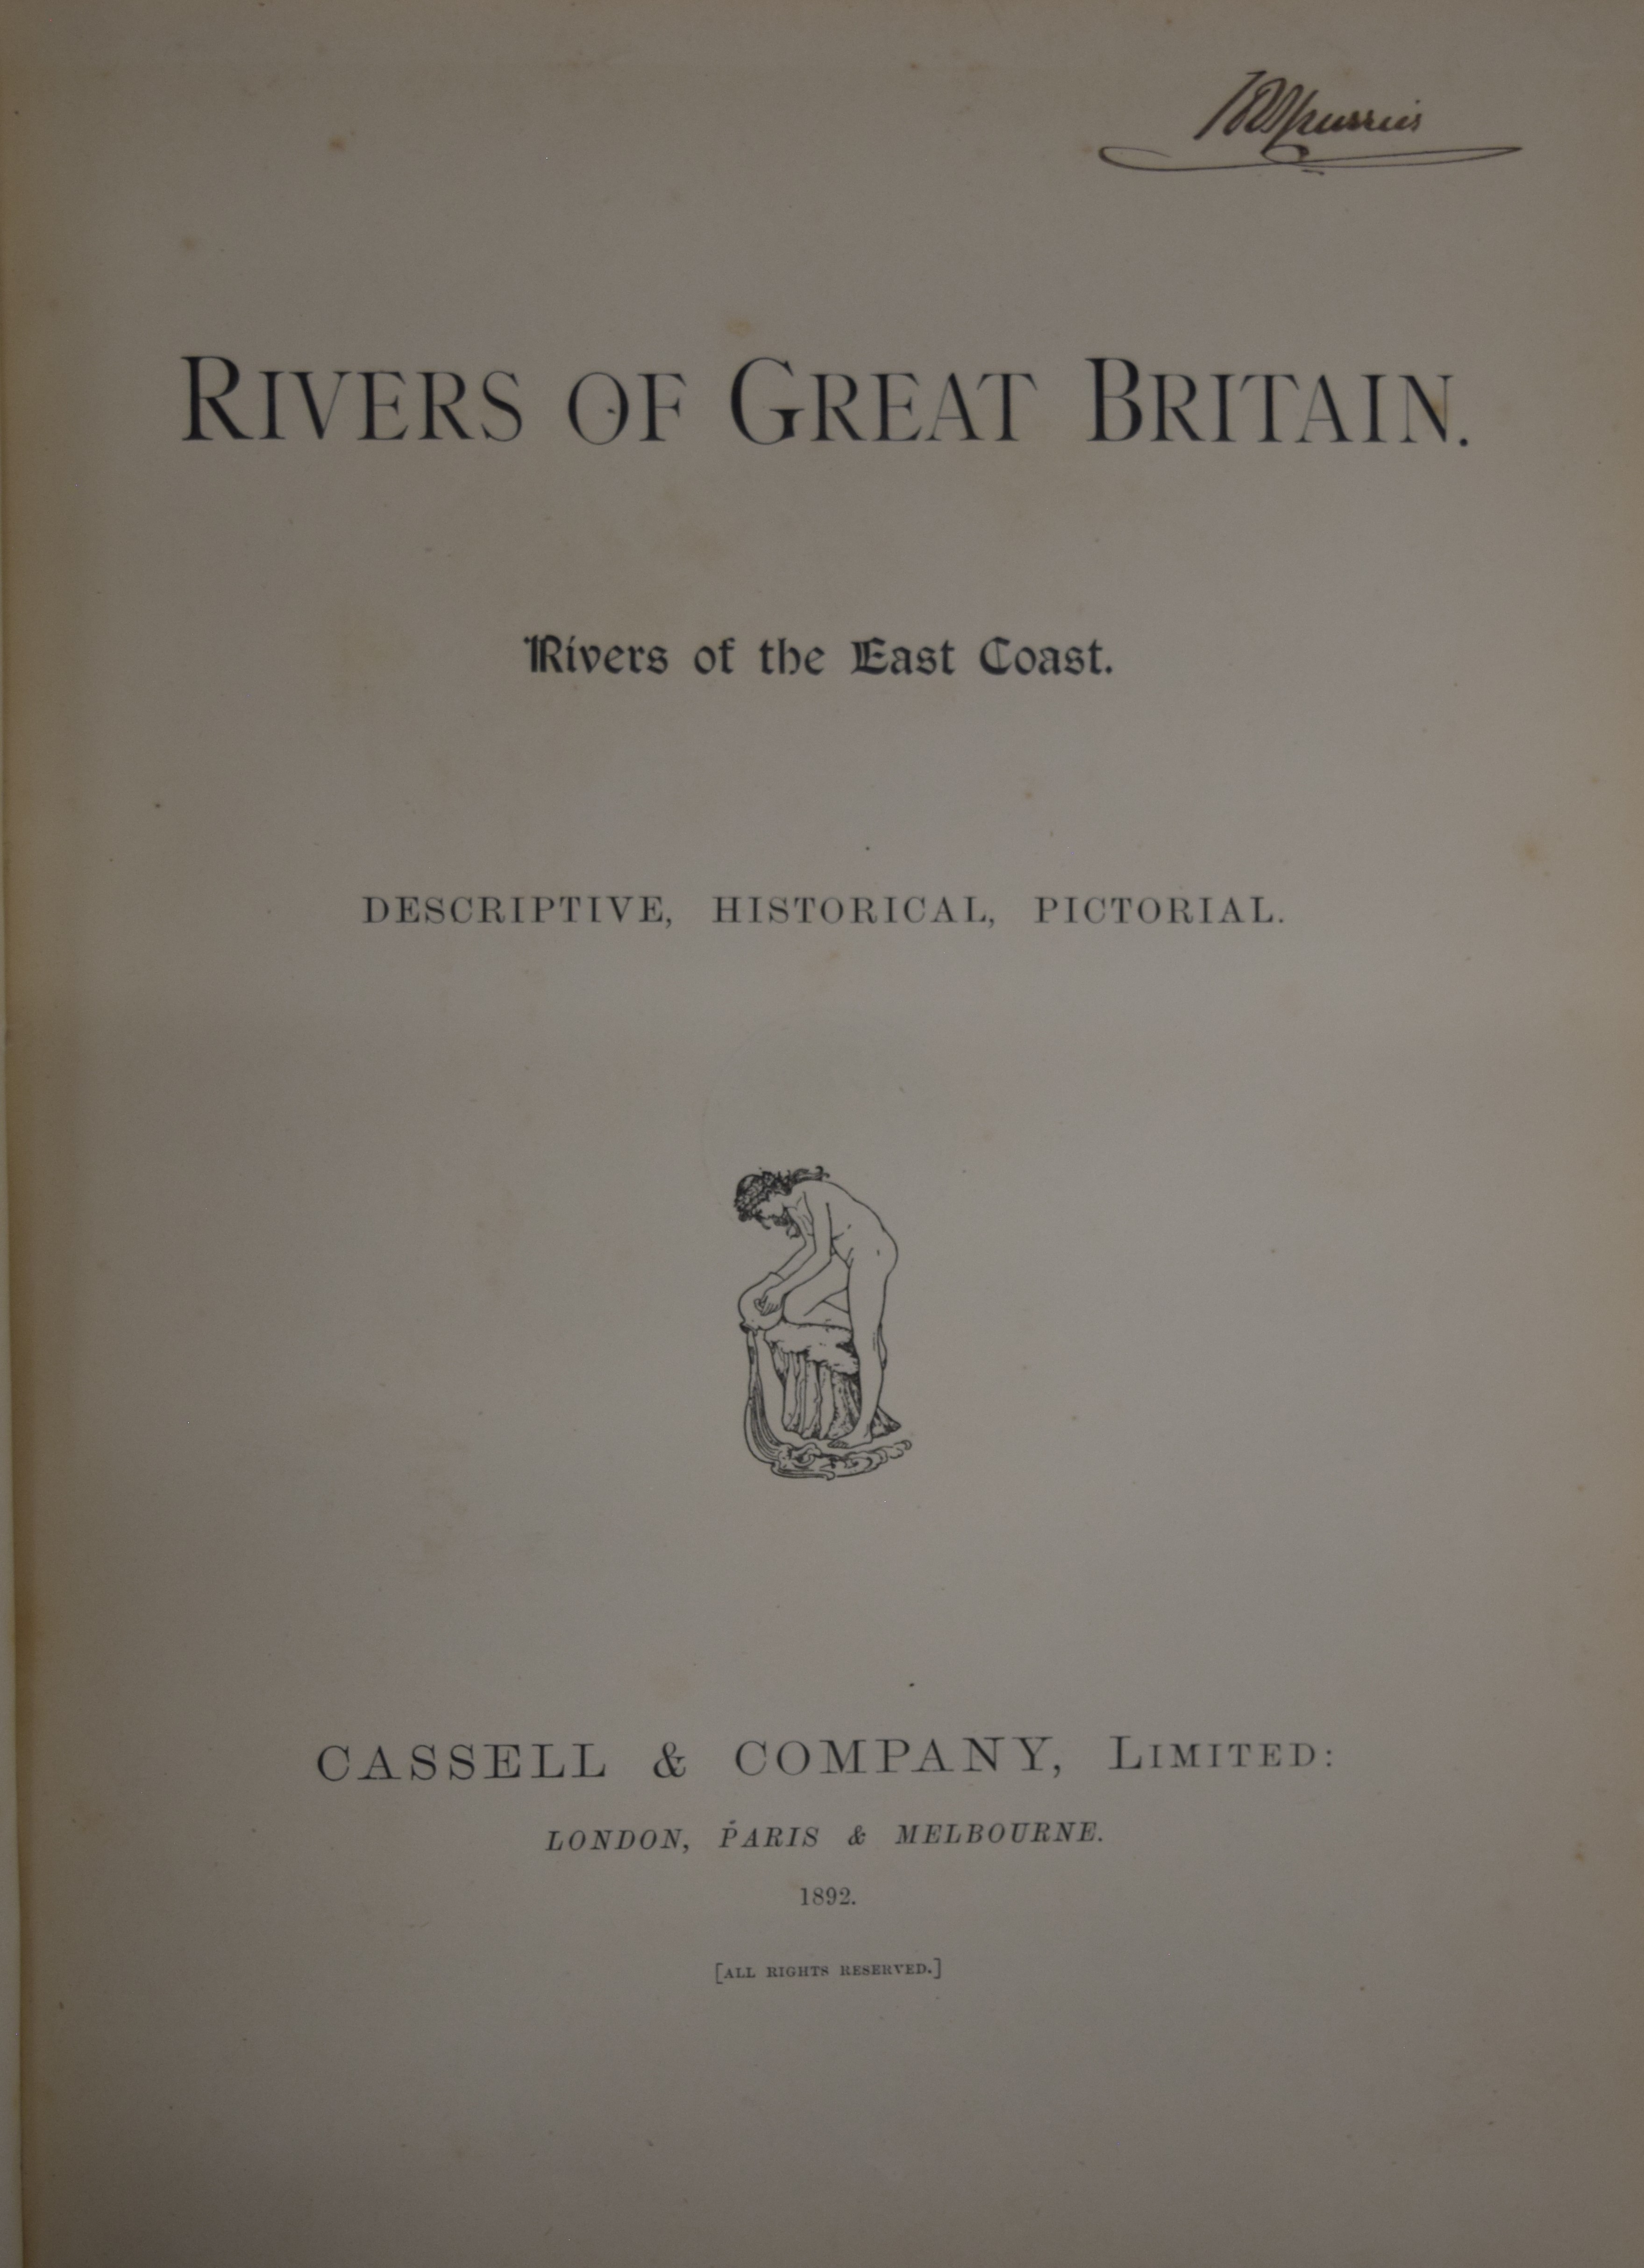 The Rivers of Great Britain; Rivers of the East Coast, 1892, - Image 8 of 14